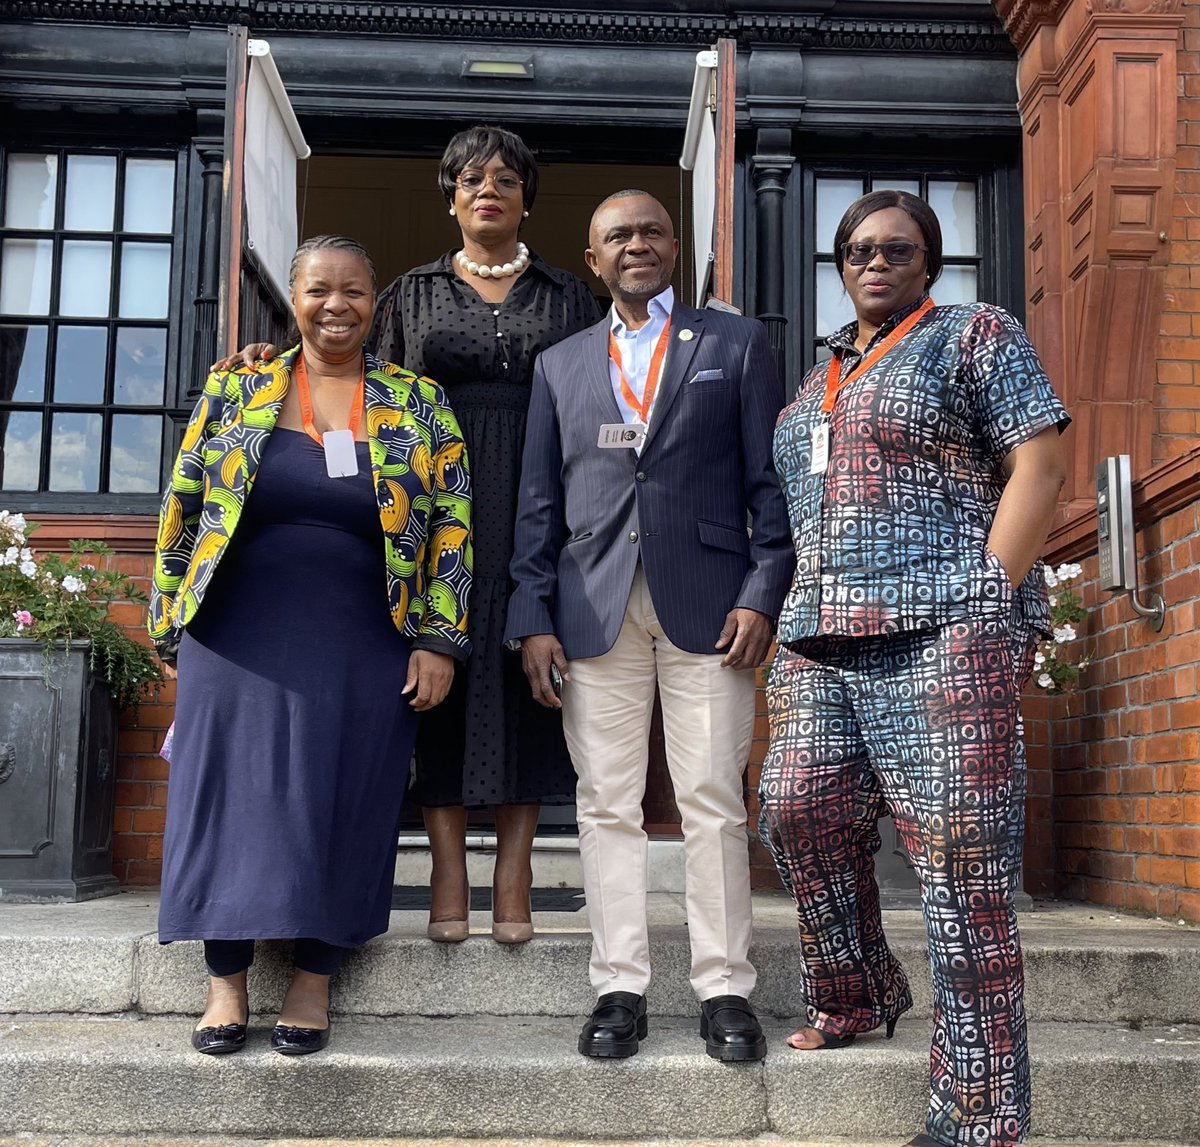 In #Dublin #Ireland for the Association of Nigerian Nurses in Ireland @ANNI_Nurse African Health Summit thank you for inviting us @NNCAUK and the warm welcome @wendyolayiwola @jidebanky & @OAdegbile @WeRGlobalNurses